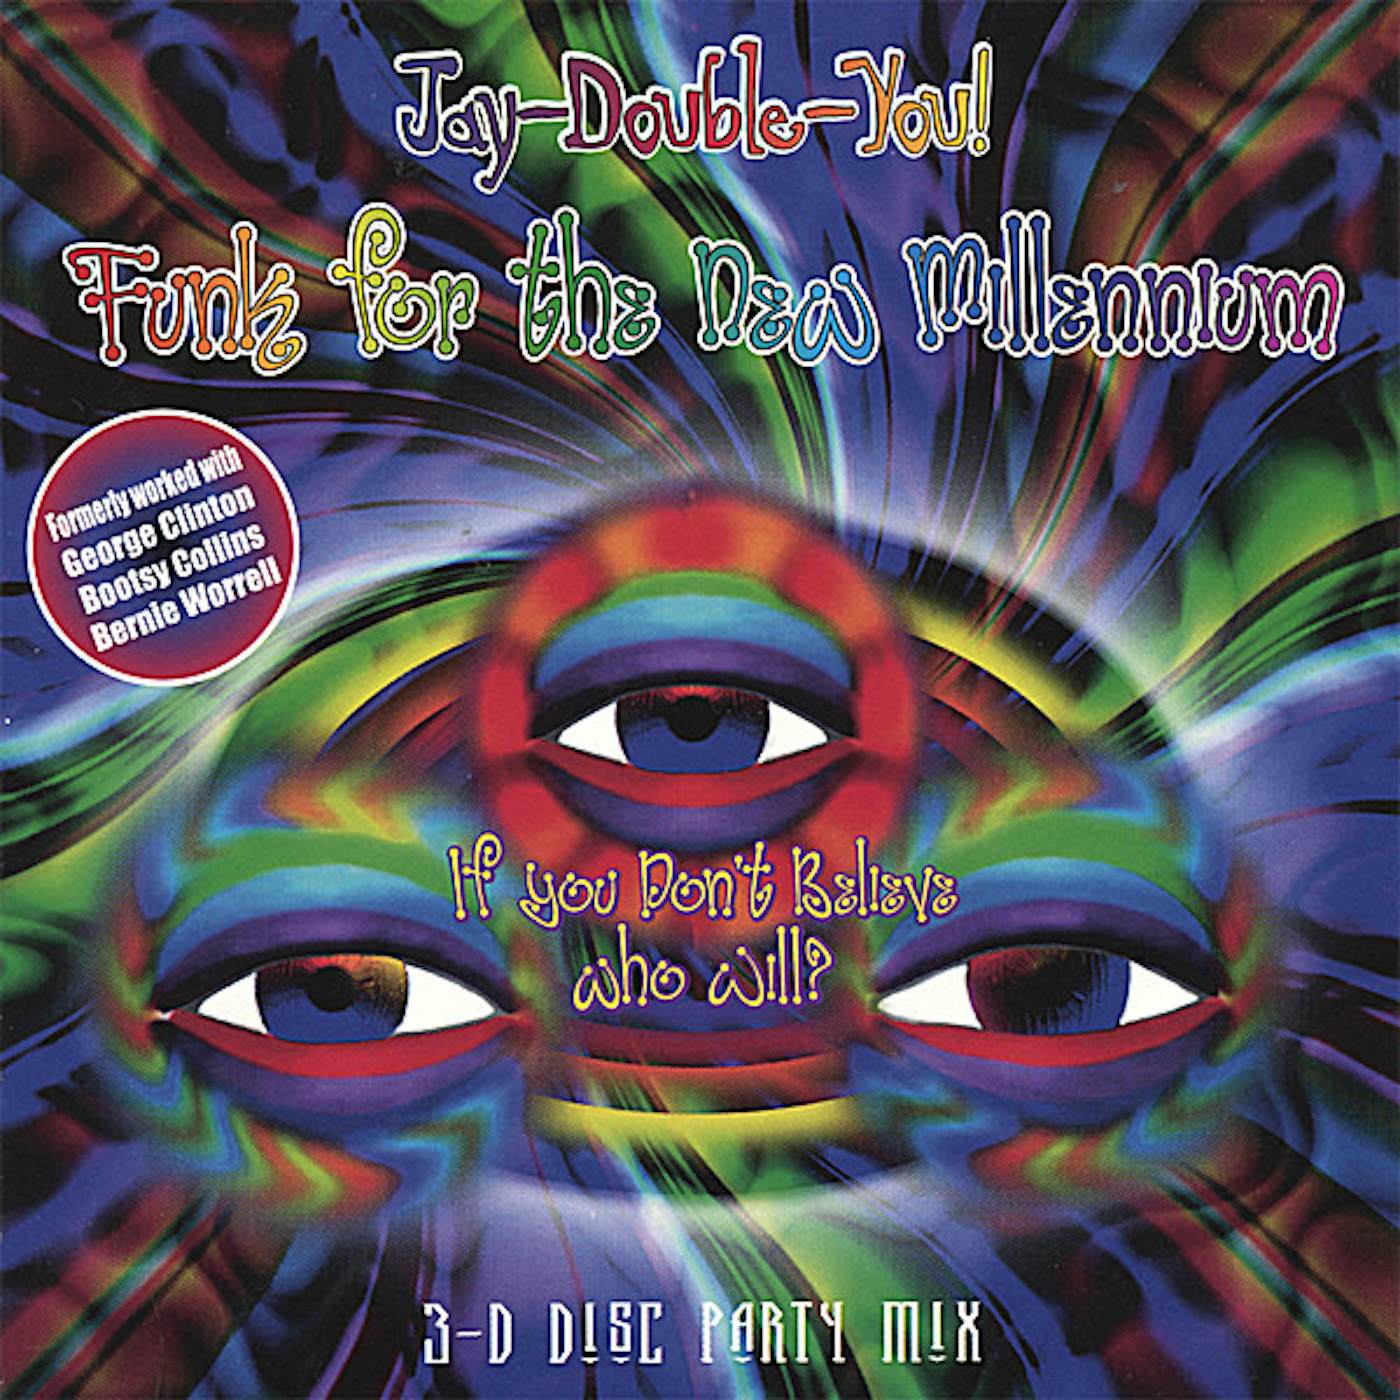 Jay Double You! FUNK FOR THE NEW MILLENNIUM CD